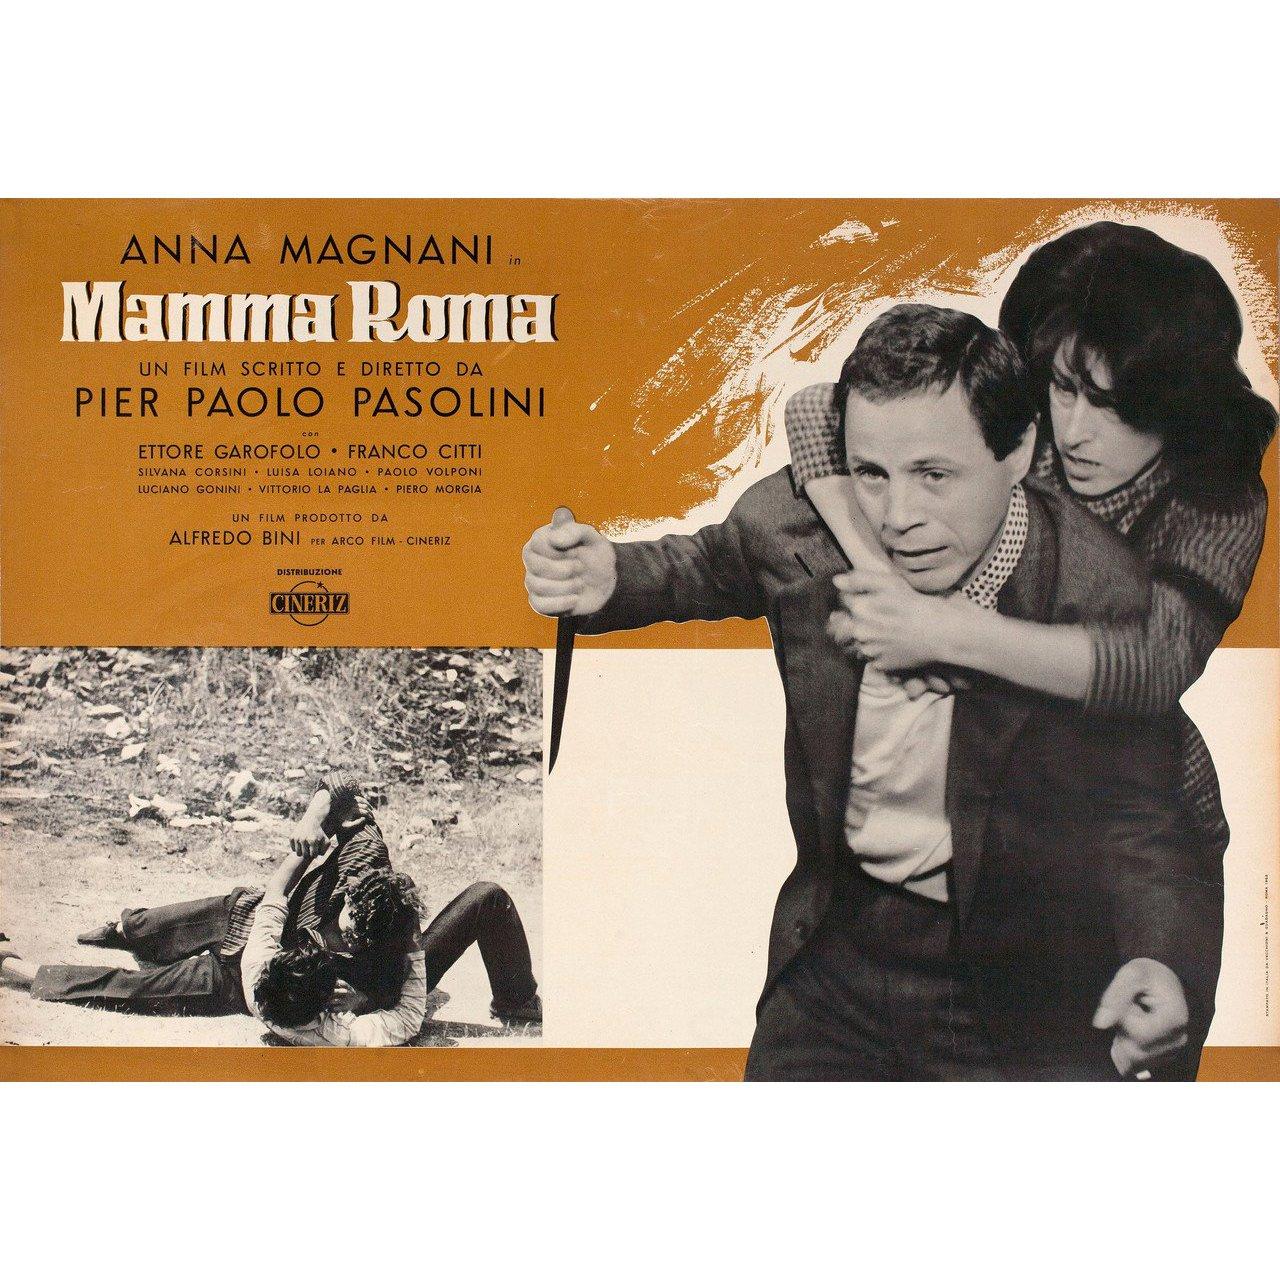 Original 1962 Italian fotobusta poster for the film 'Mamma Roma' directed by Pier Paolo Pasolini with Anna Magnani / Ettore Garofolo / Franco Citti / Silvana Corsini. Very good-fine condition, rolled. Please note: the size is stated in inches and